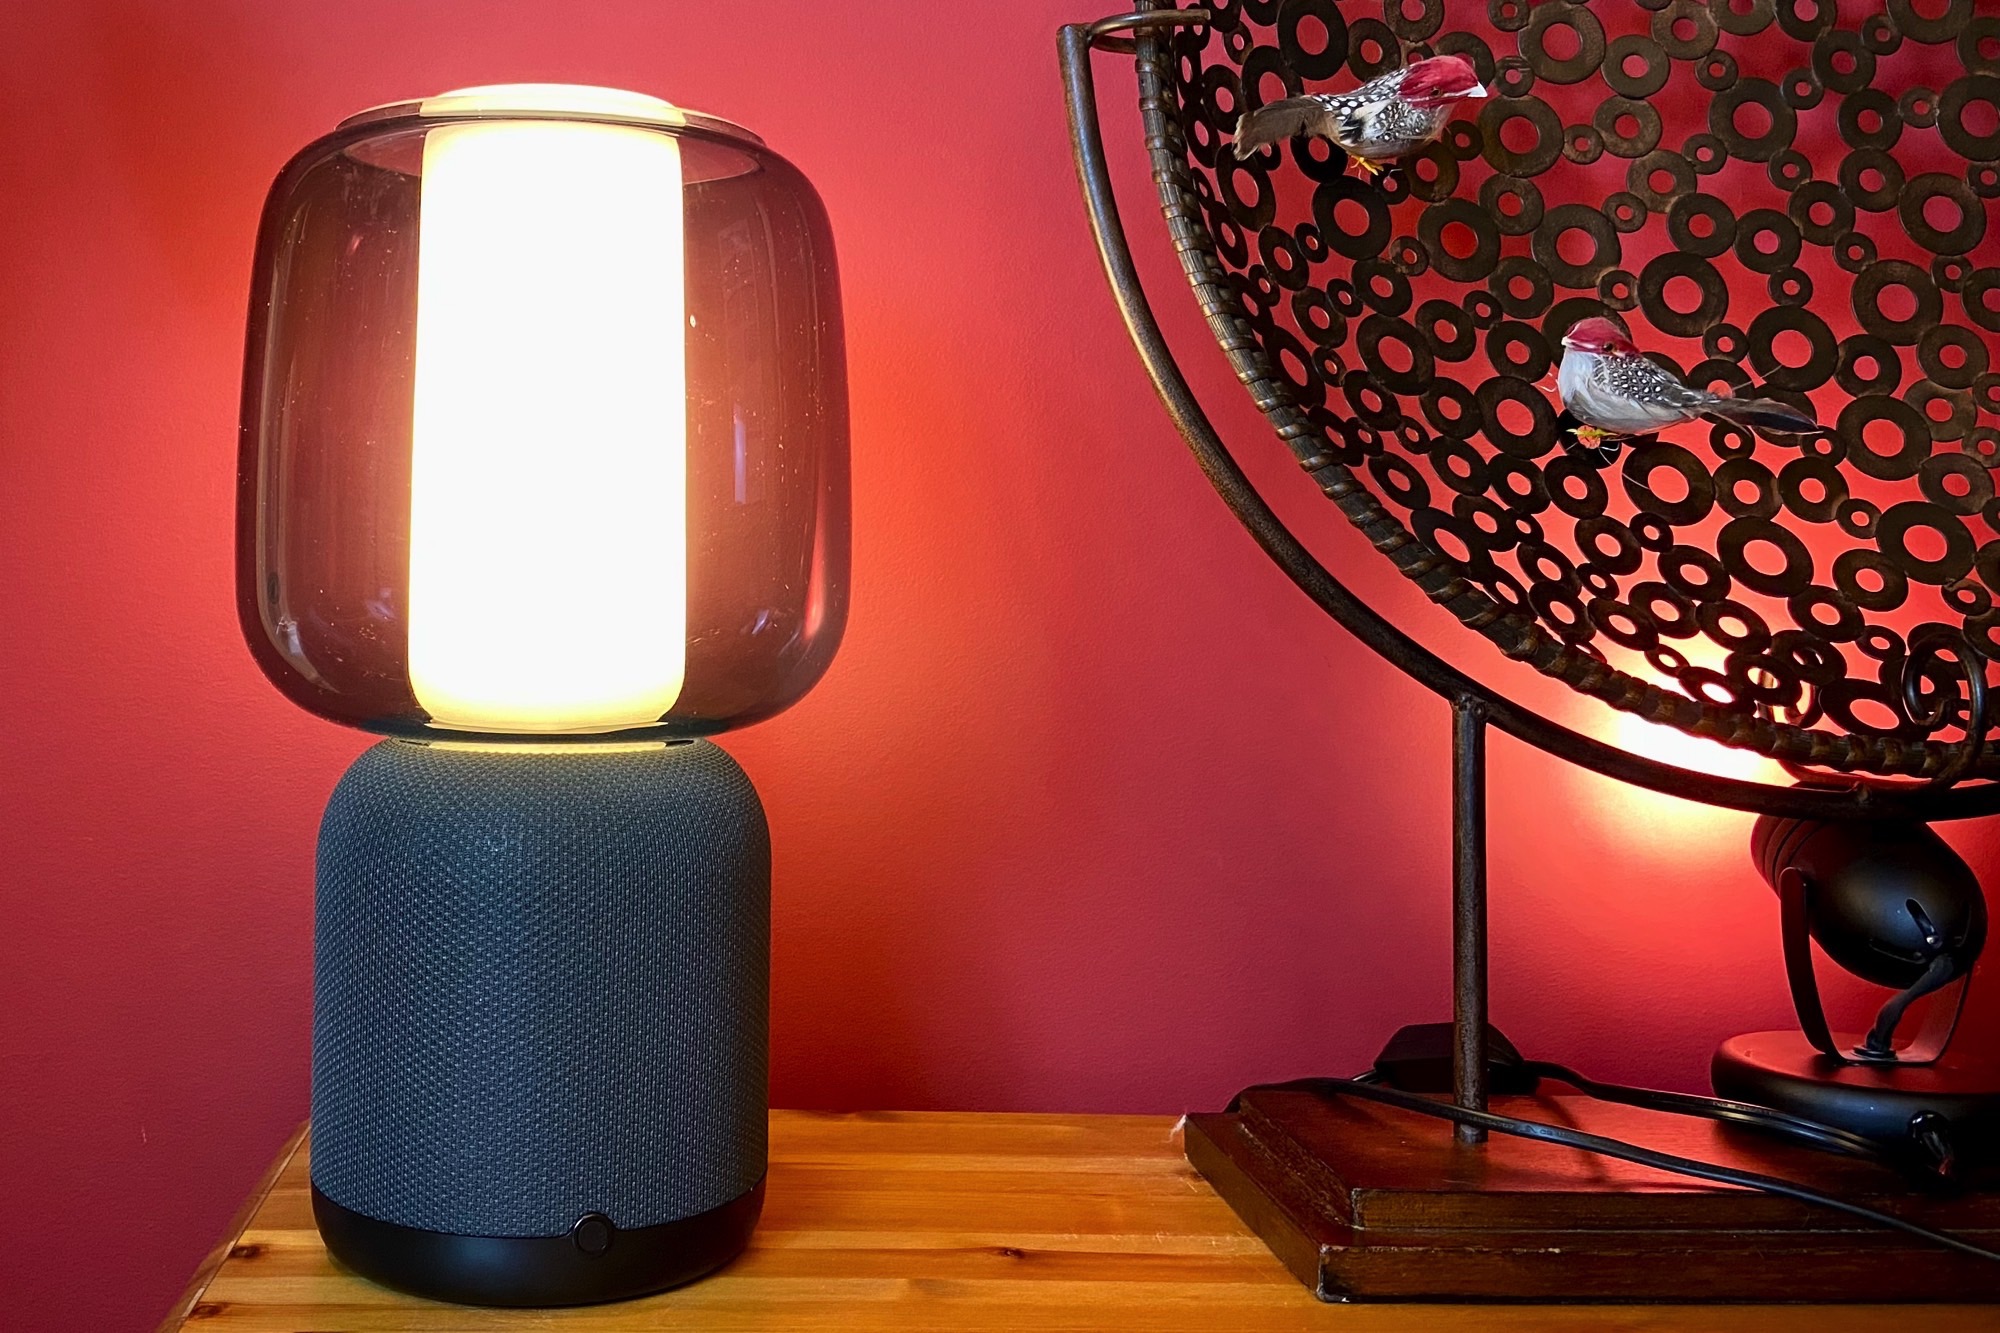 Ikea Symfonisk Table Lamp Review: More Light, More Sound | Digital